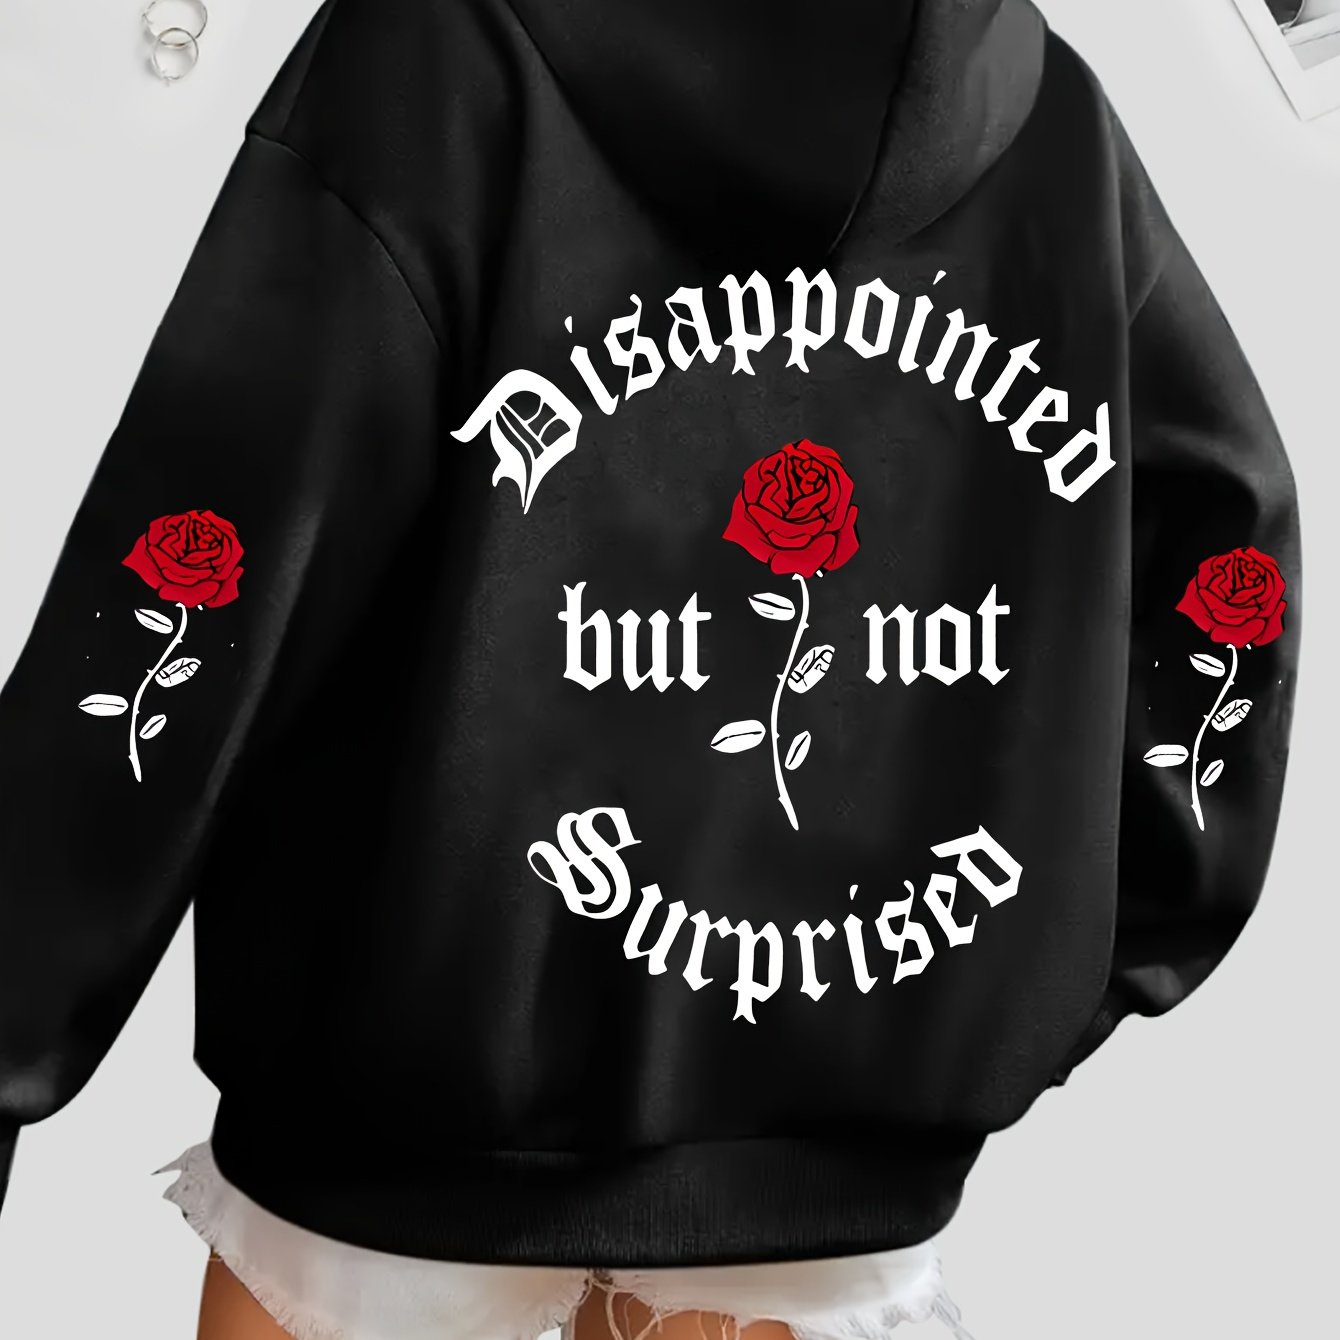 

Women's Casual Polyester Hoodie With Front Pocket - Fall/winter Season Long Sleeve Hooded Sweatshirt With Rose Graphics And "disappointed But Not Surprised" Lettering